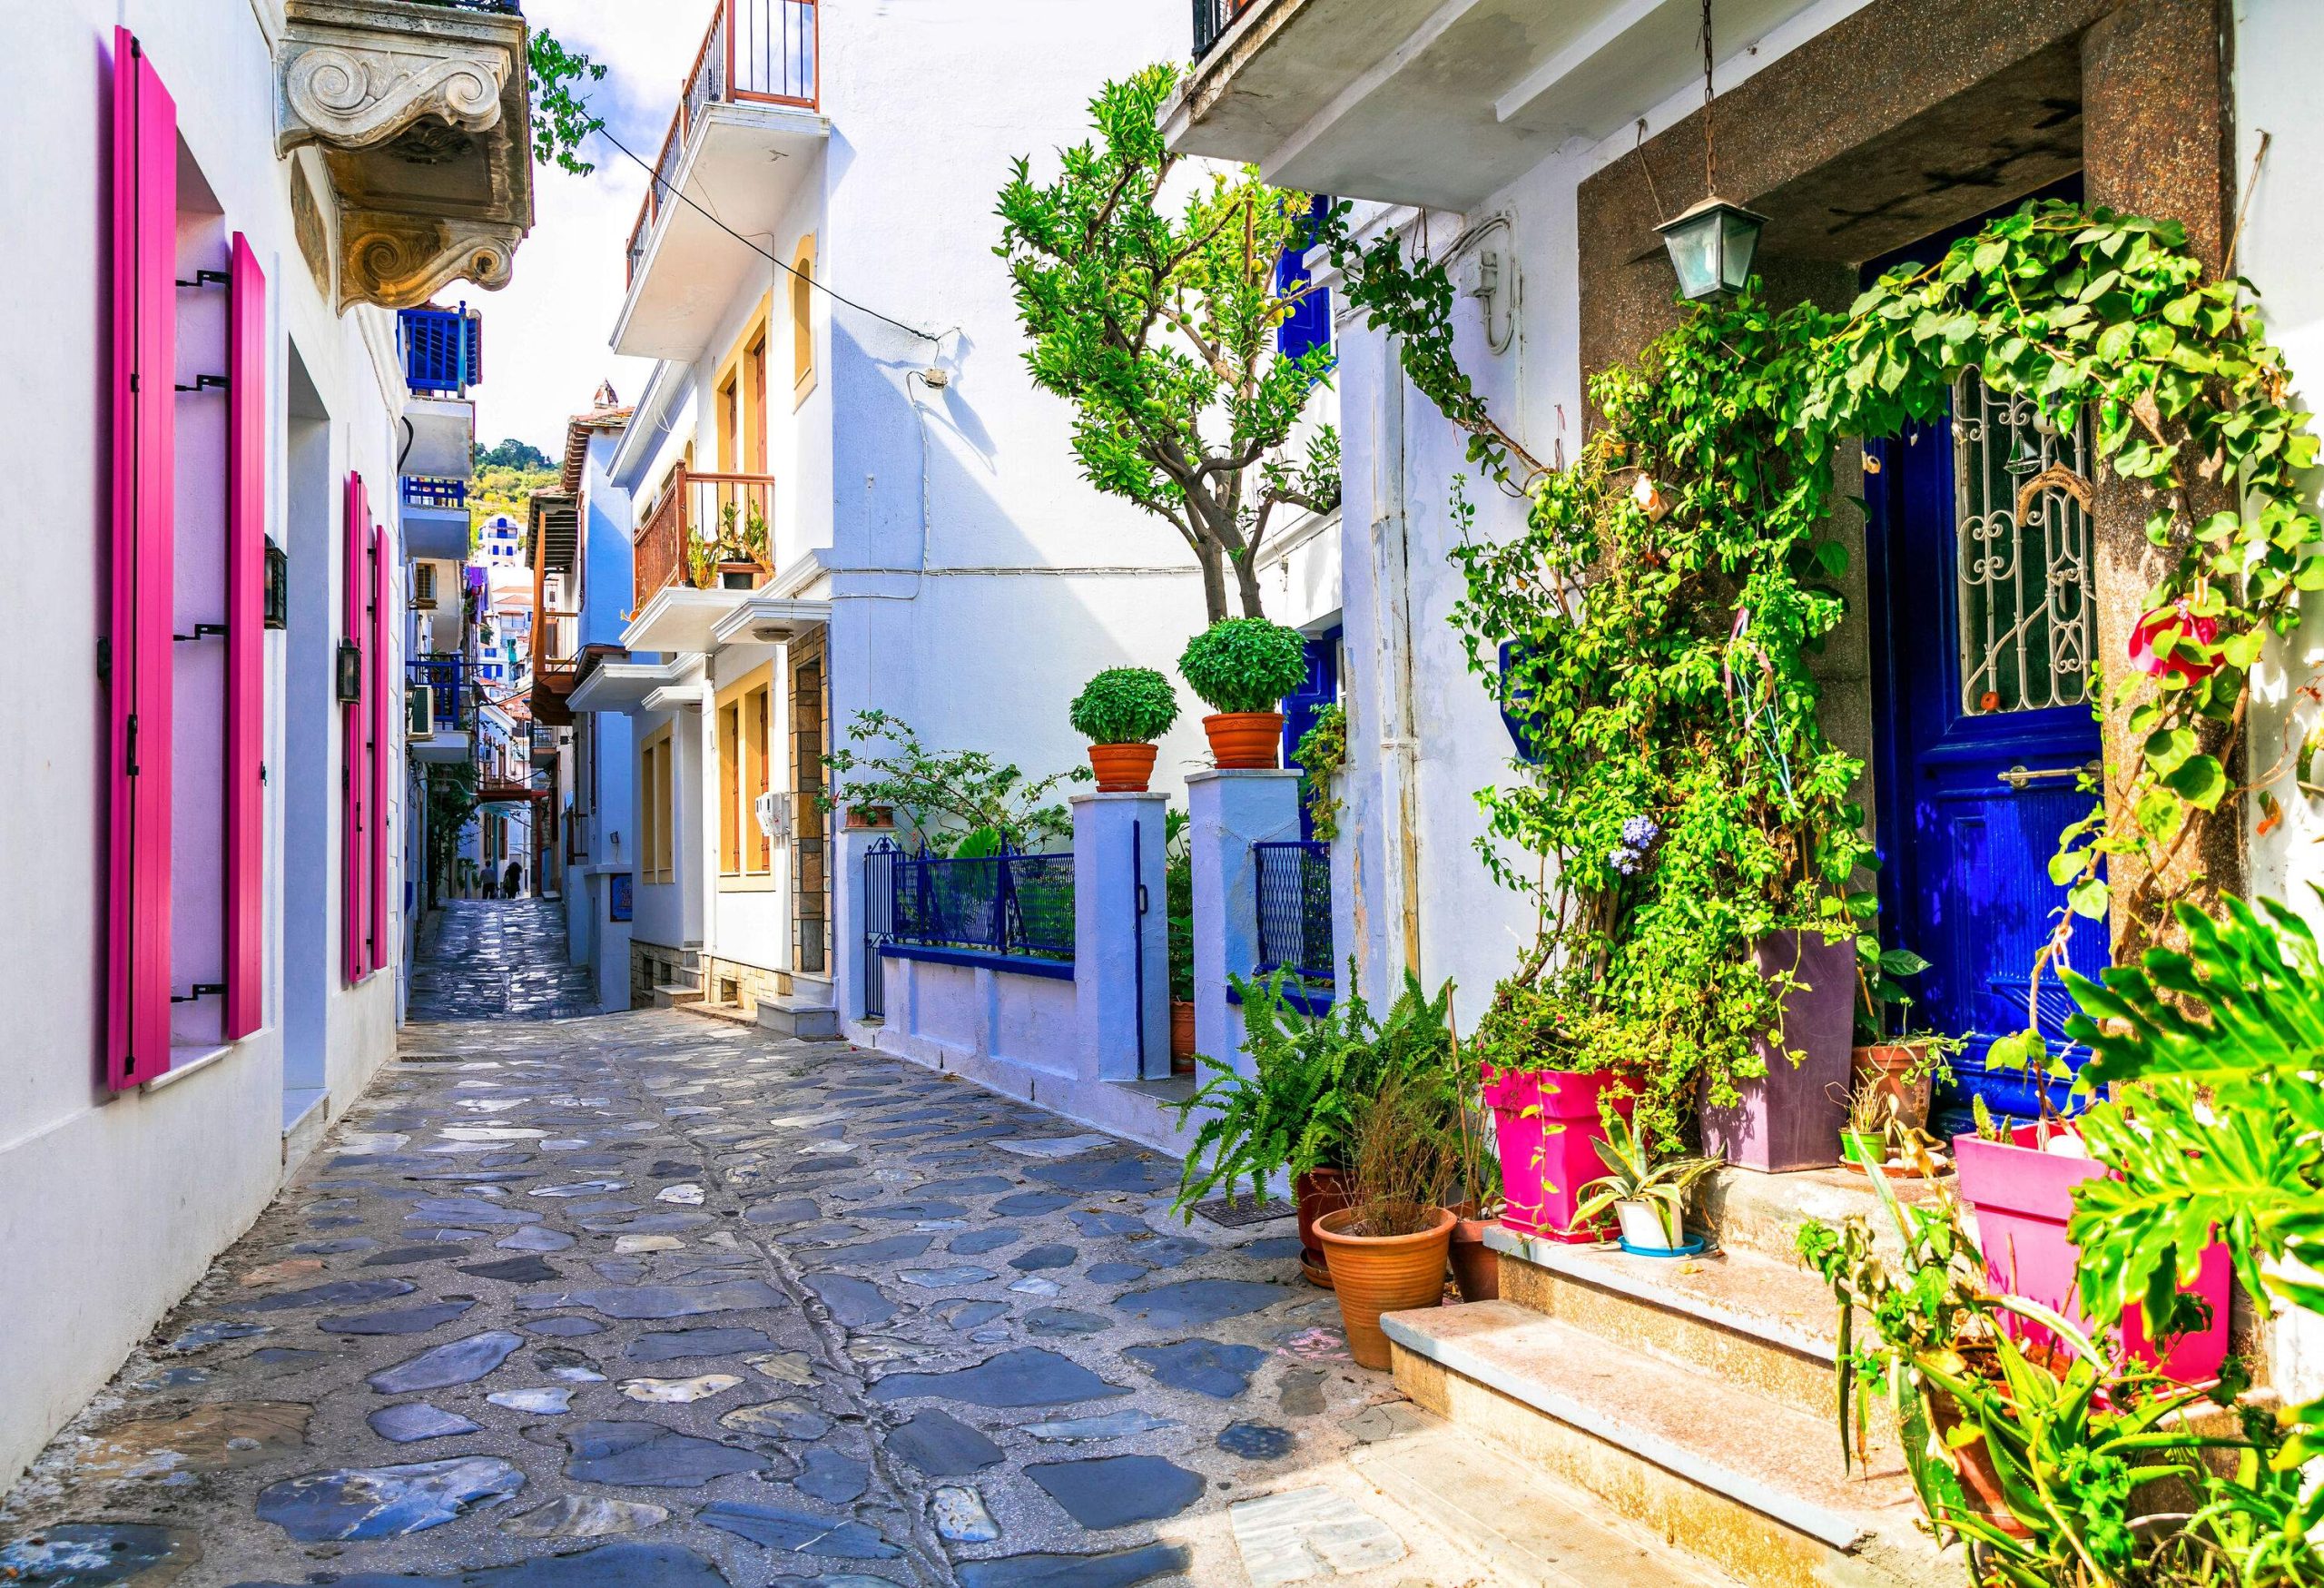 A charming stone-paved alleyway lined with colourful row homes, adorned with vibrant plants and flowers.